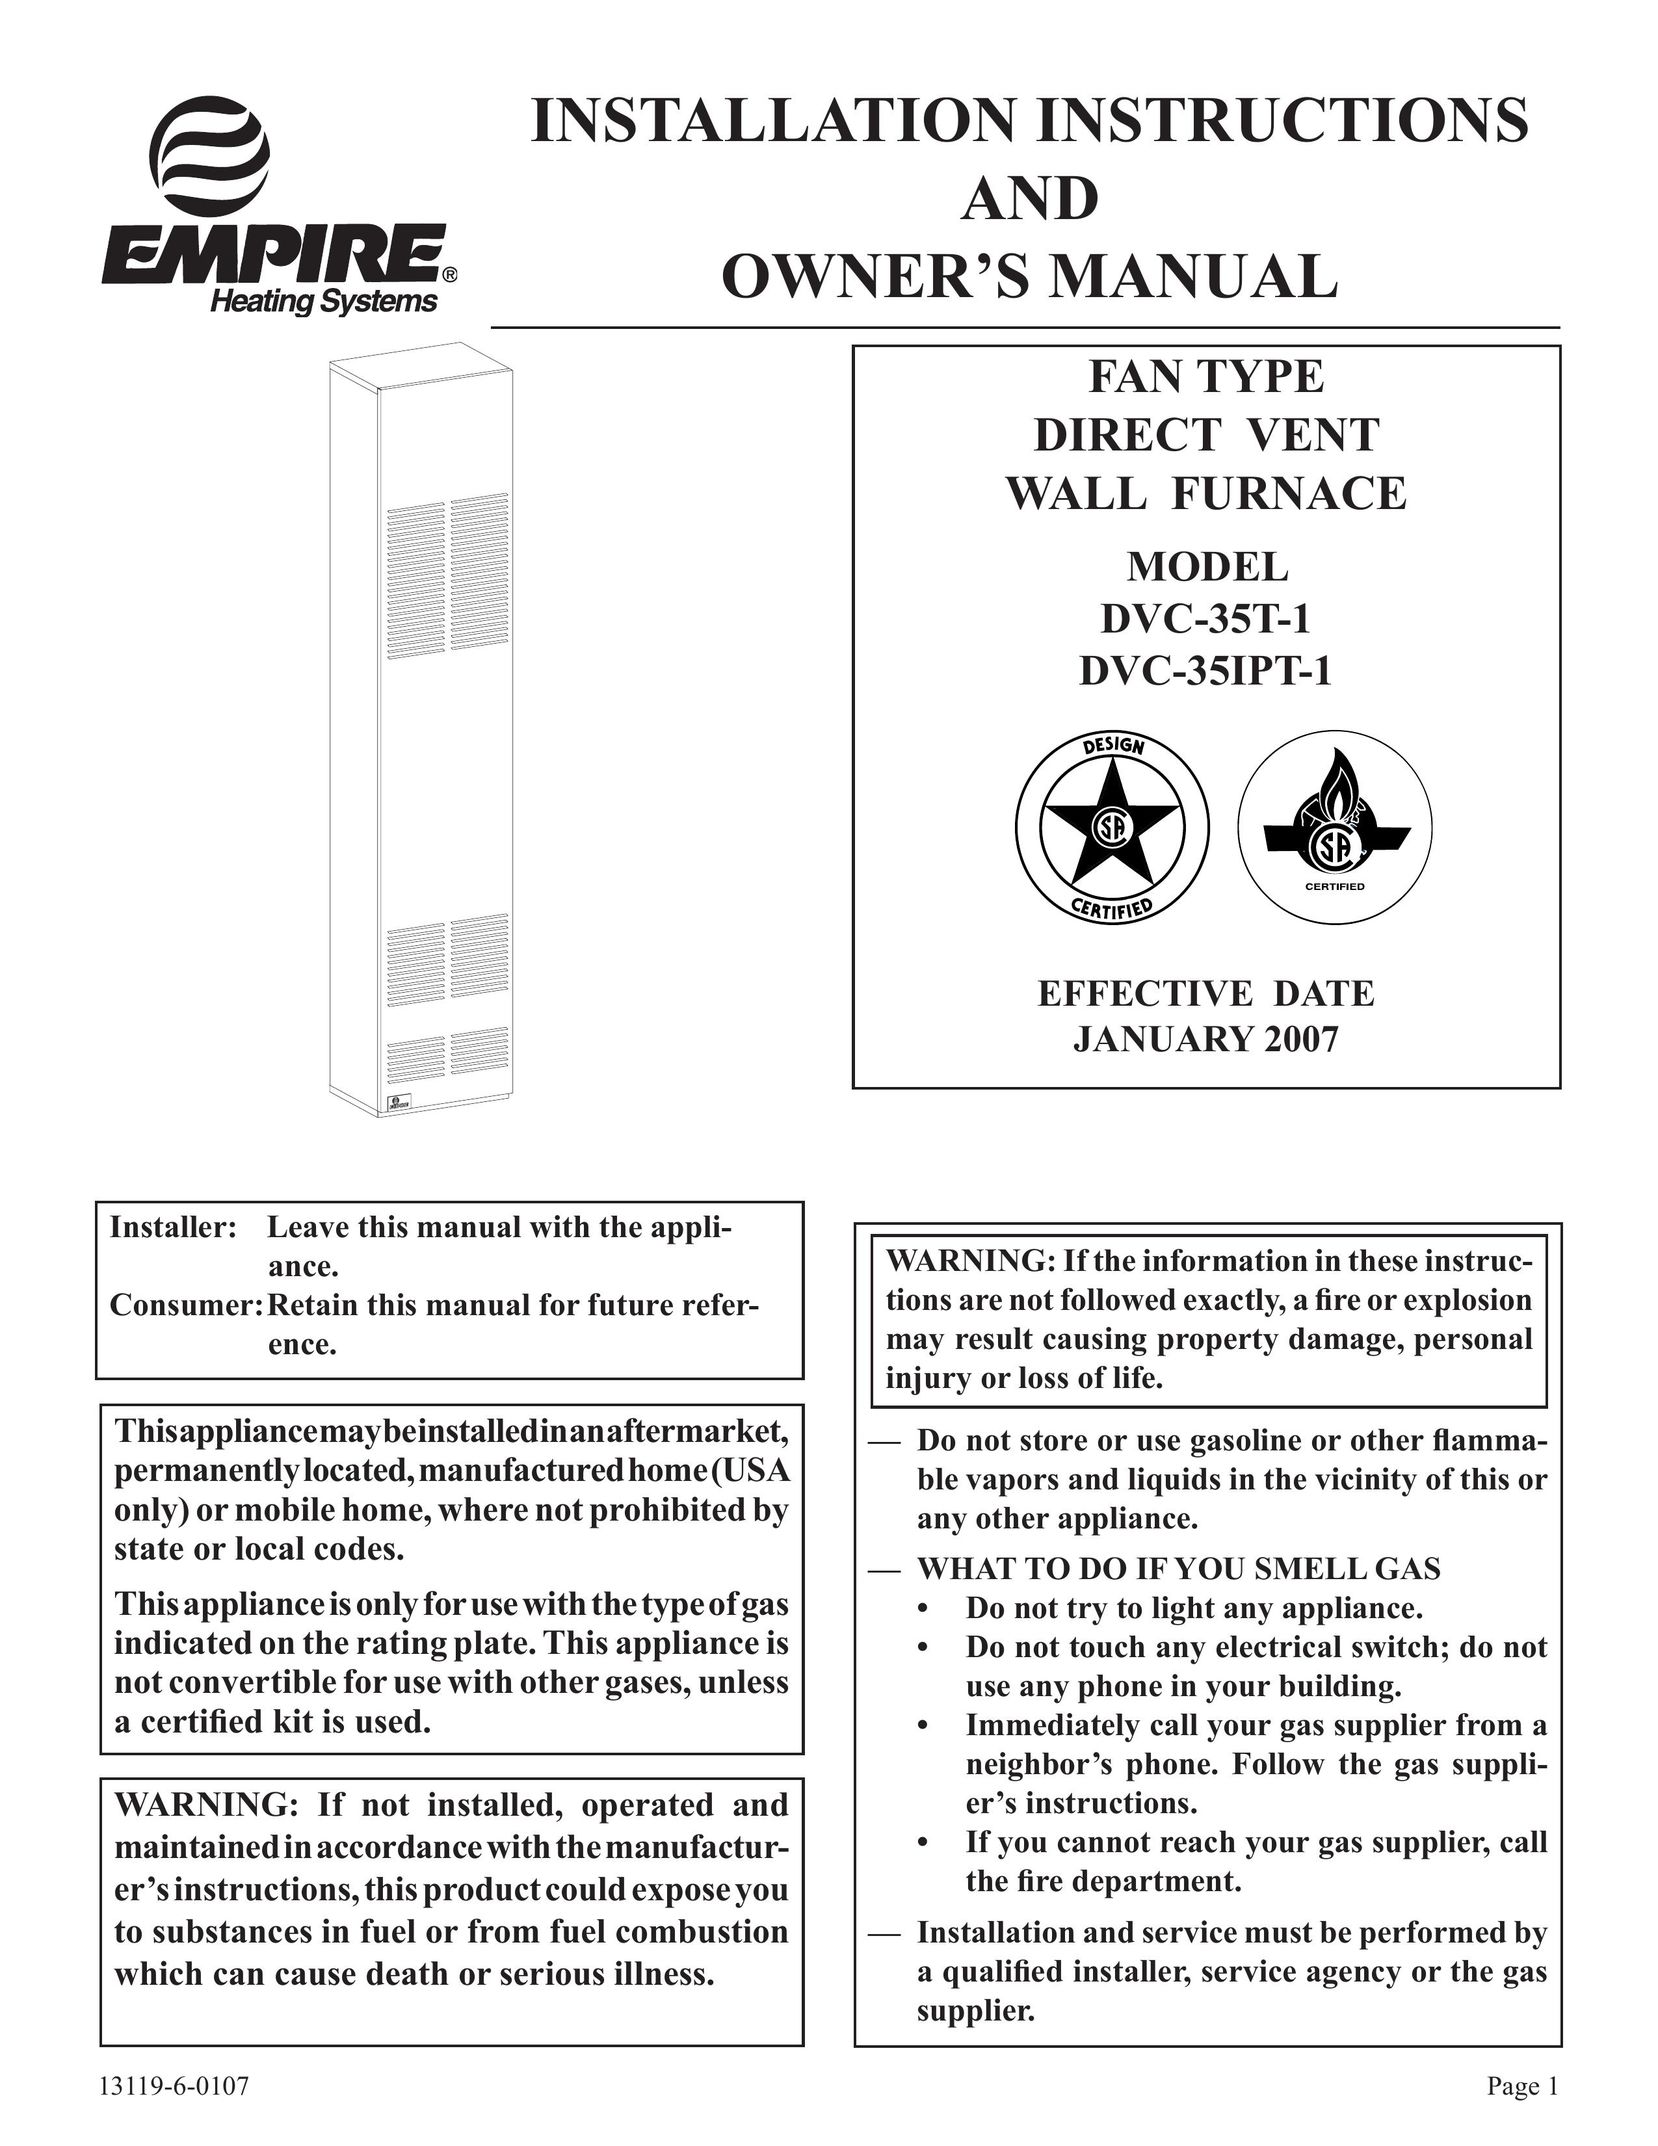 Empire Products DVC-35IPT-1 Furnace User Manual